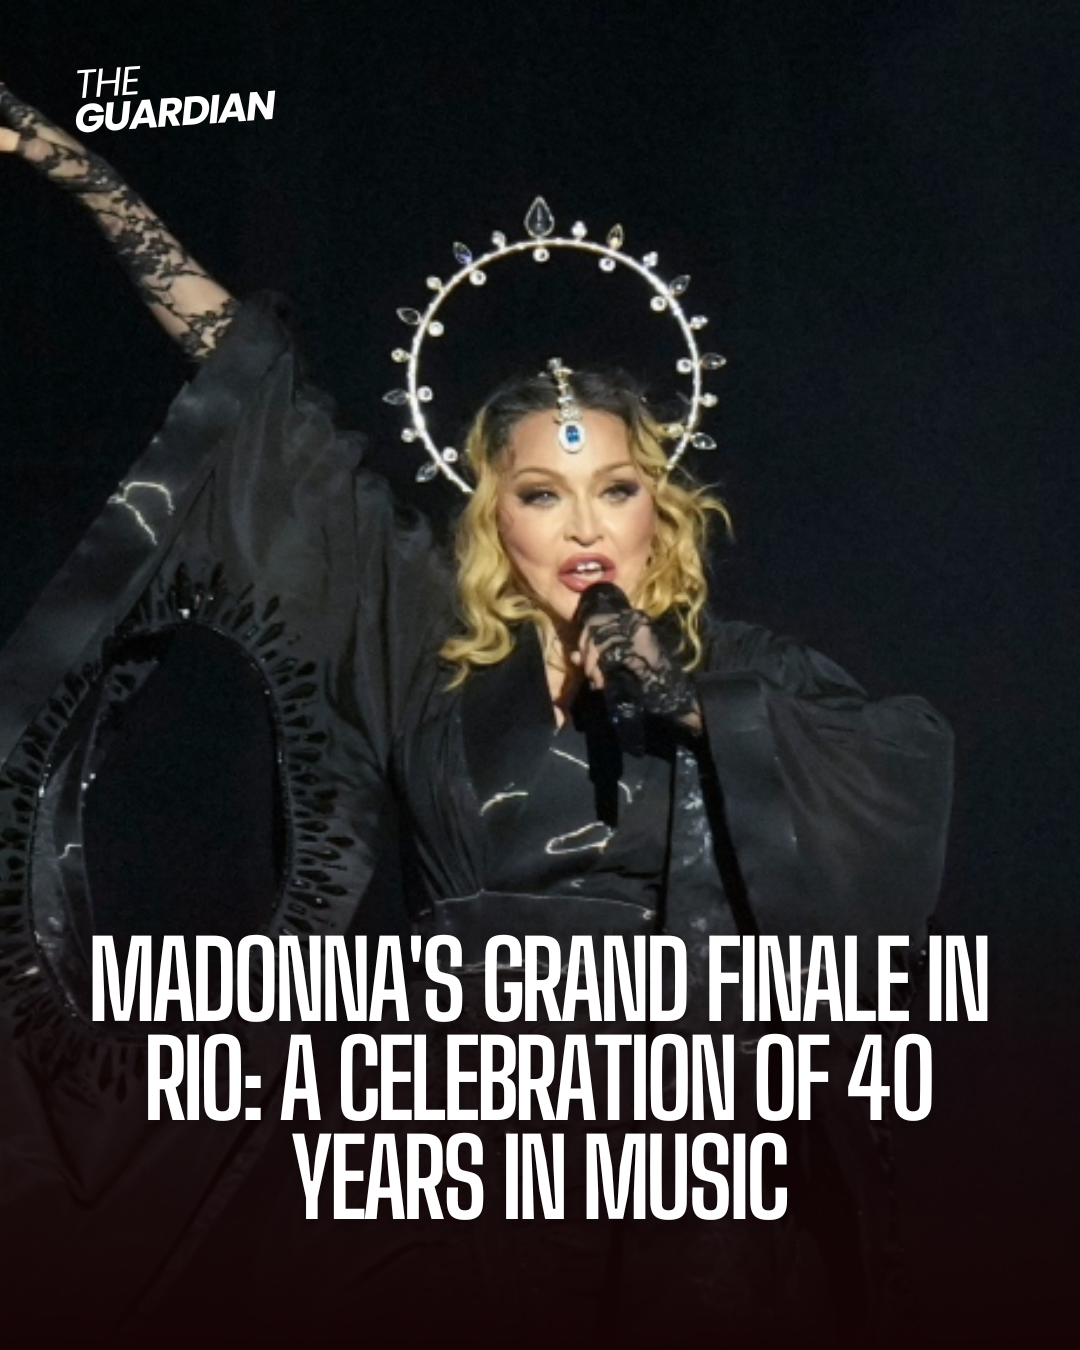 Madonna put on a free show in Rio de Janeiro on Saturday evening with crowds of fans flocking to see the pop star on Brazil's renowned Copacabana beach.